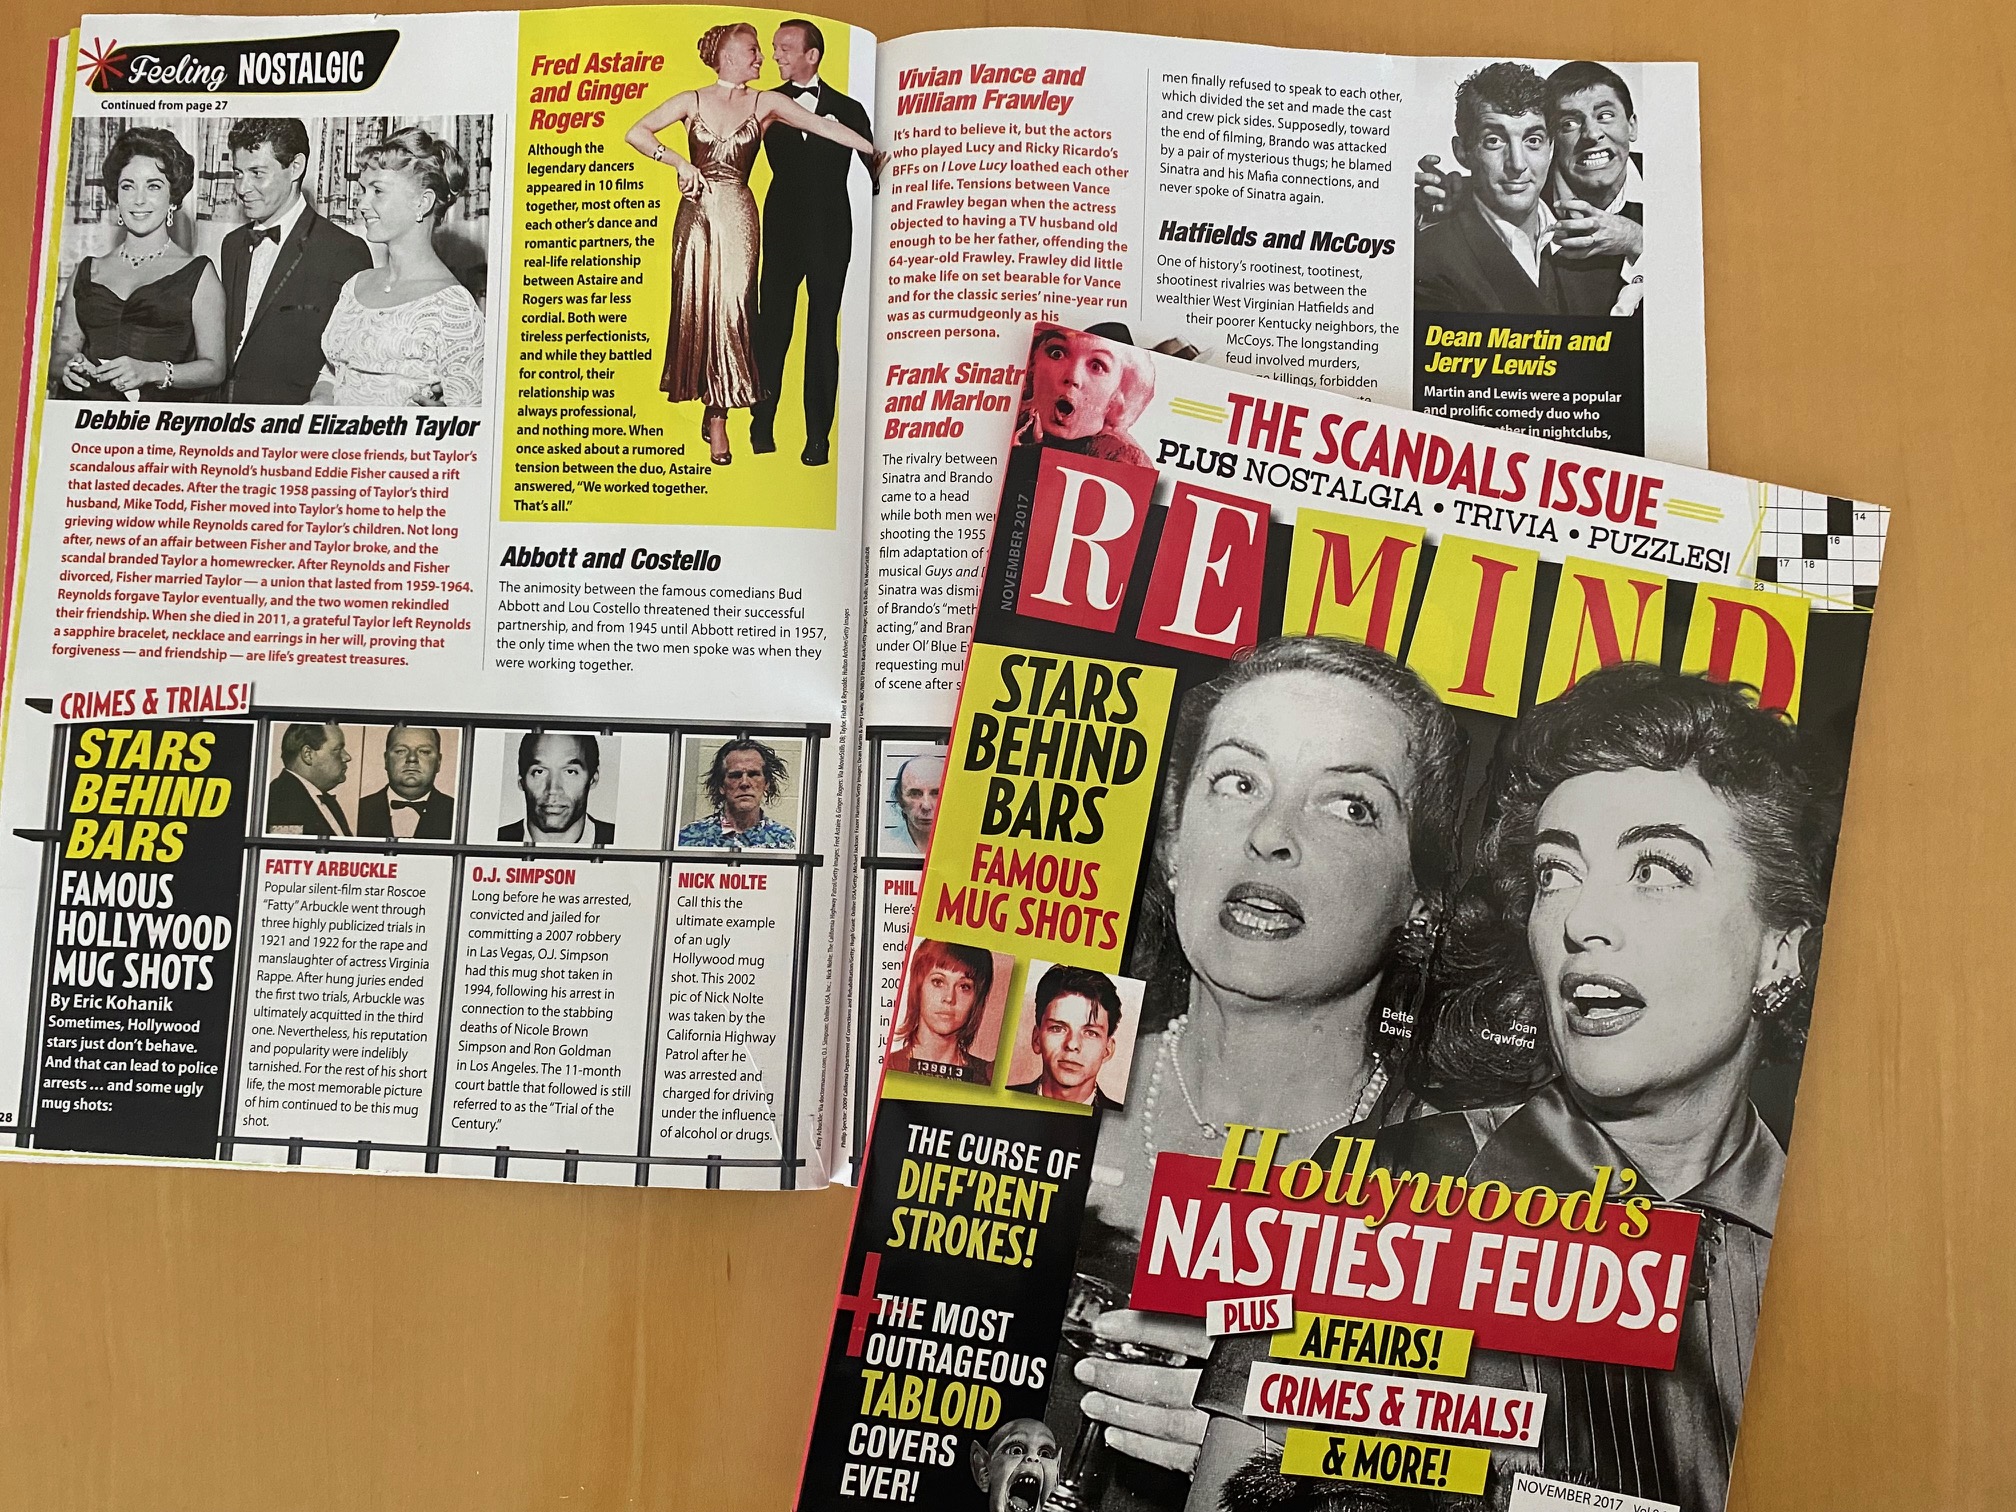 ReMIND Magazine Hollywood's Nastiest Feuds cover of Bette Davis and Joan Crawford